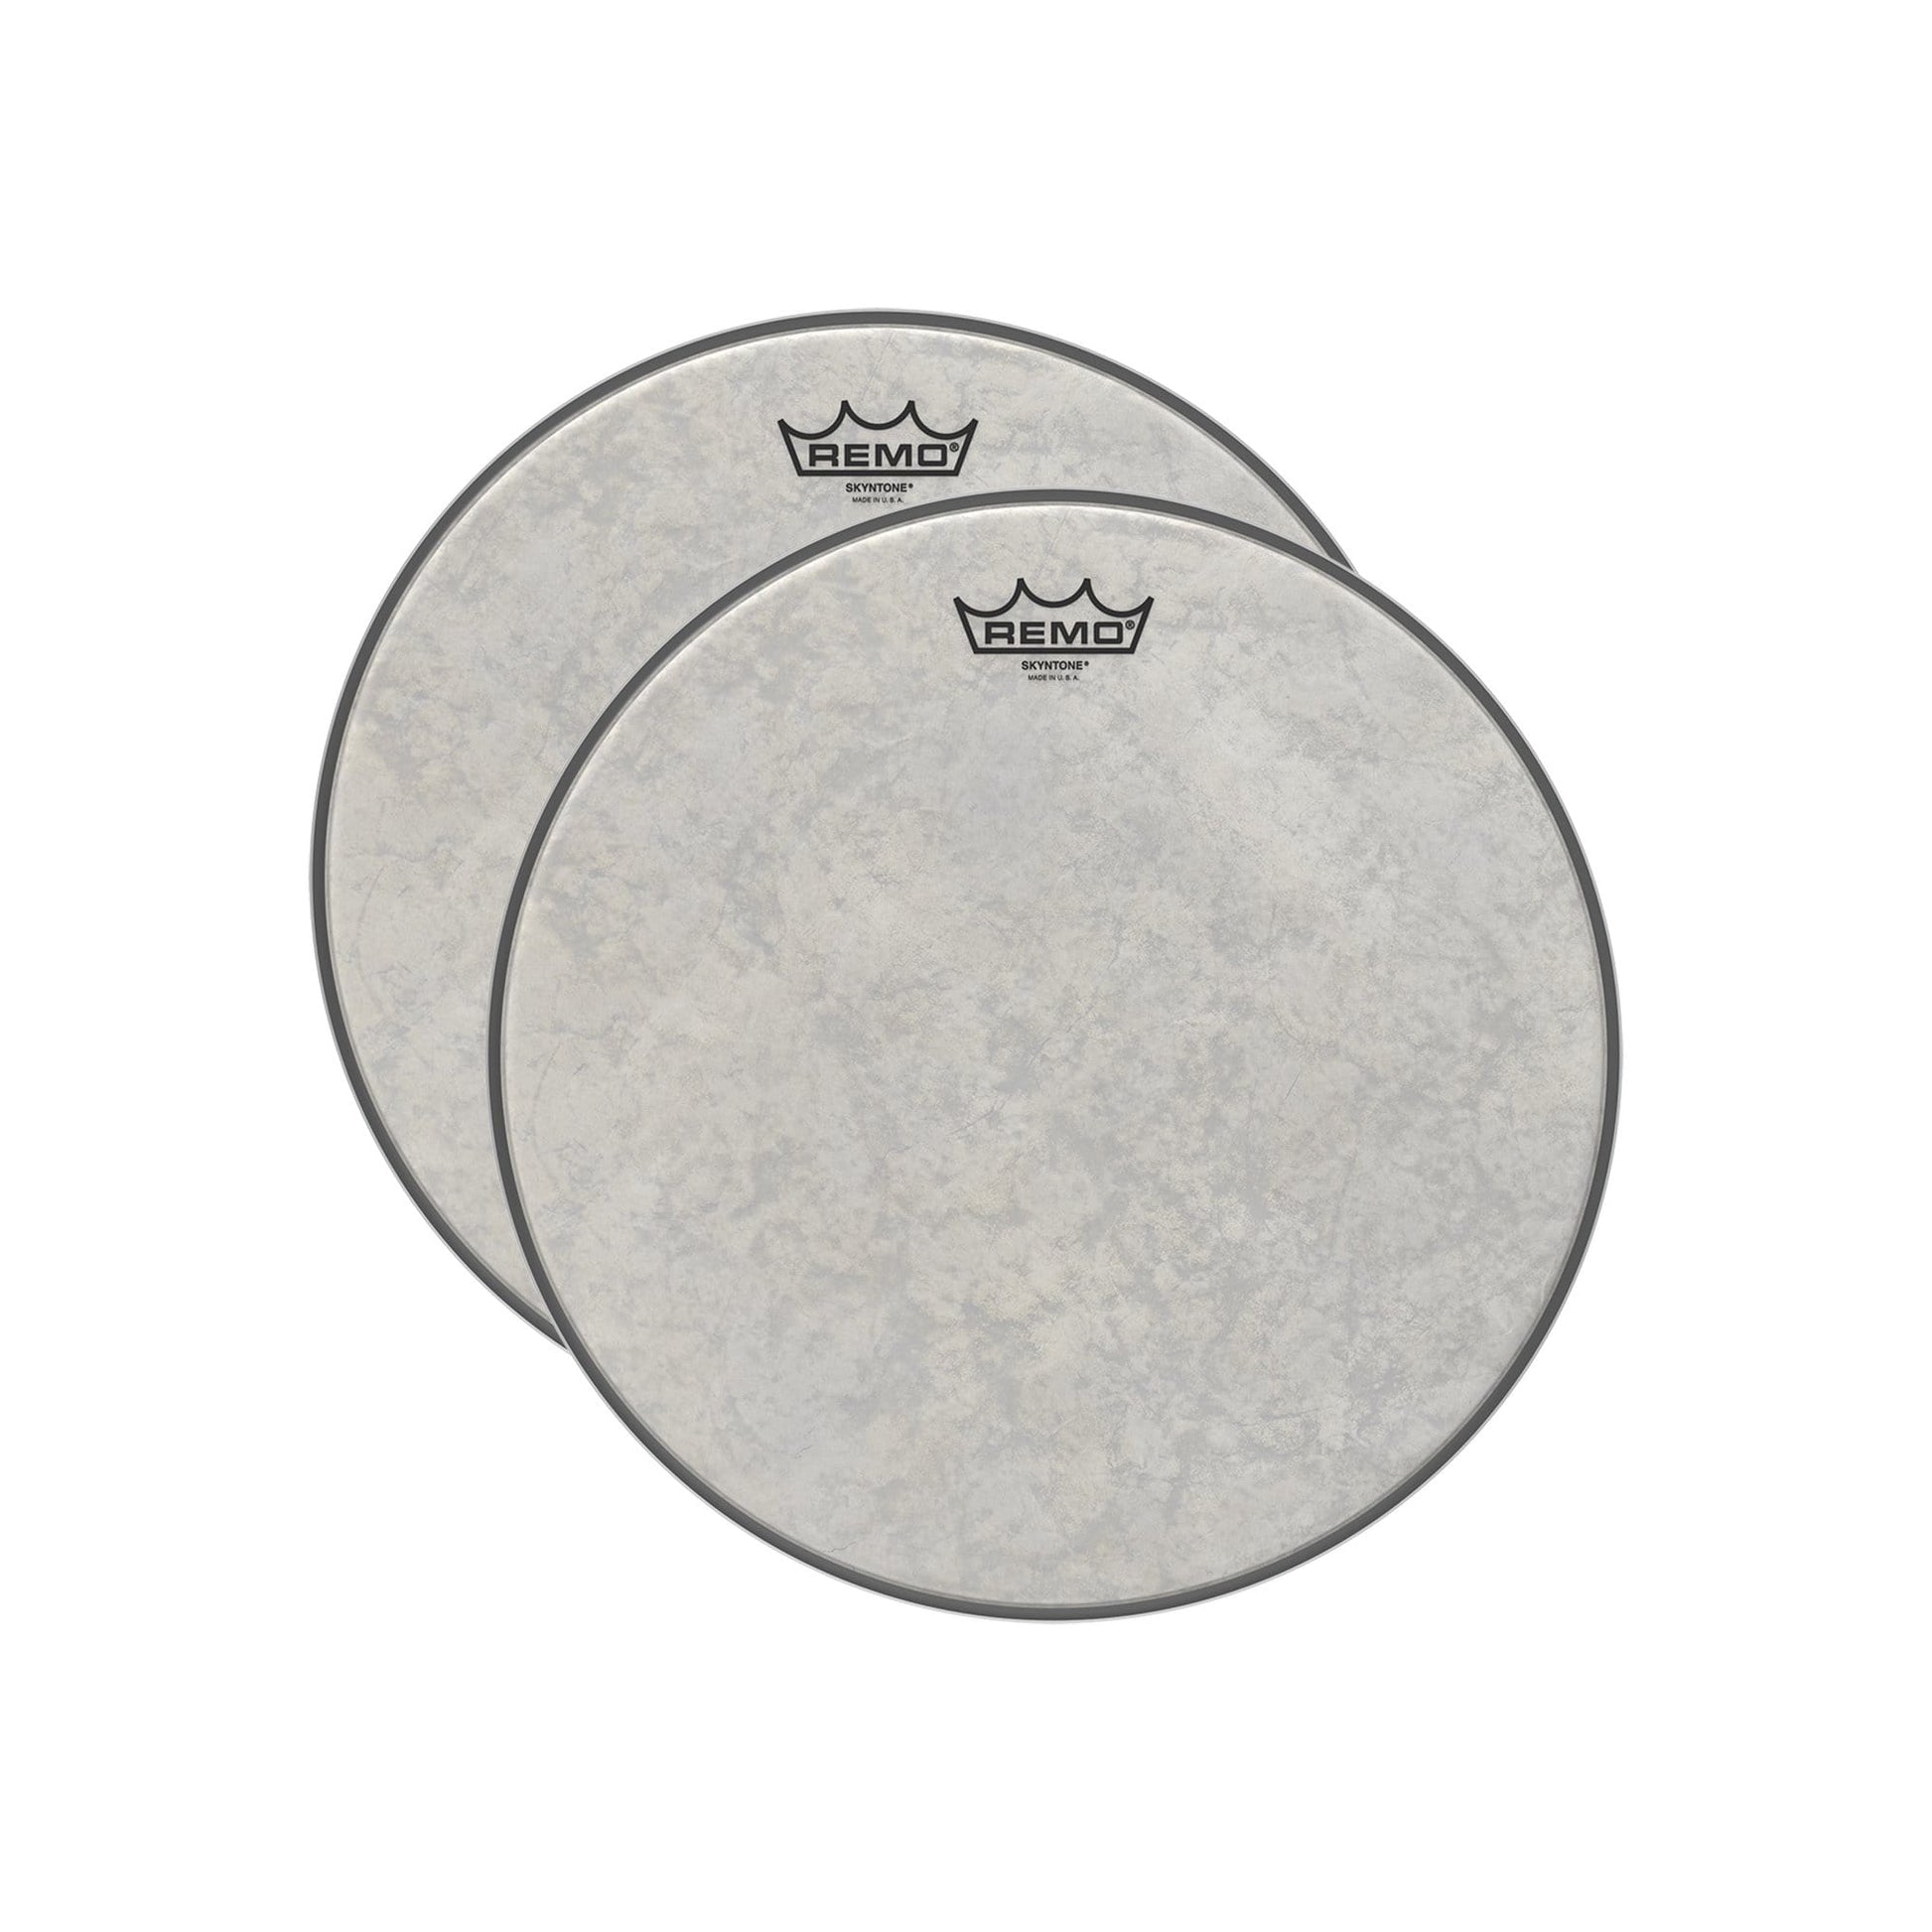 Remo 14" Diplomat Skyntone Drumhead (2 Pack Bundle) Drums and Percussion / Parts and Accessories / Heads